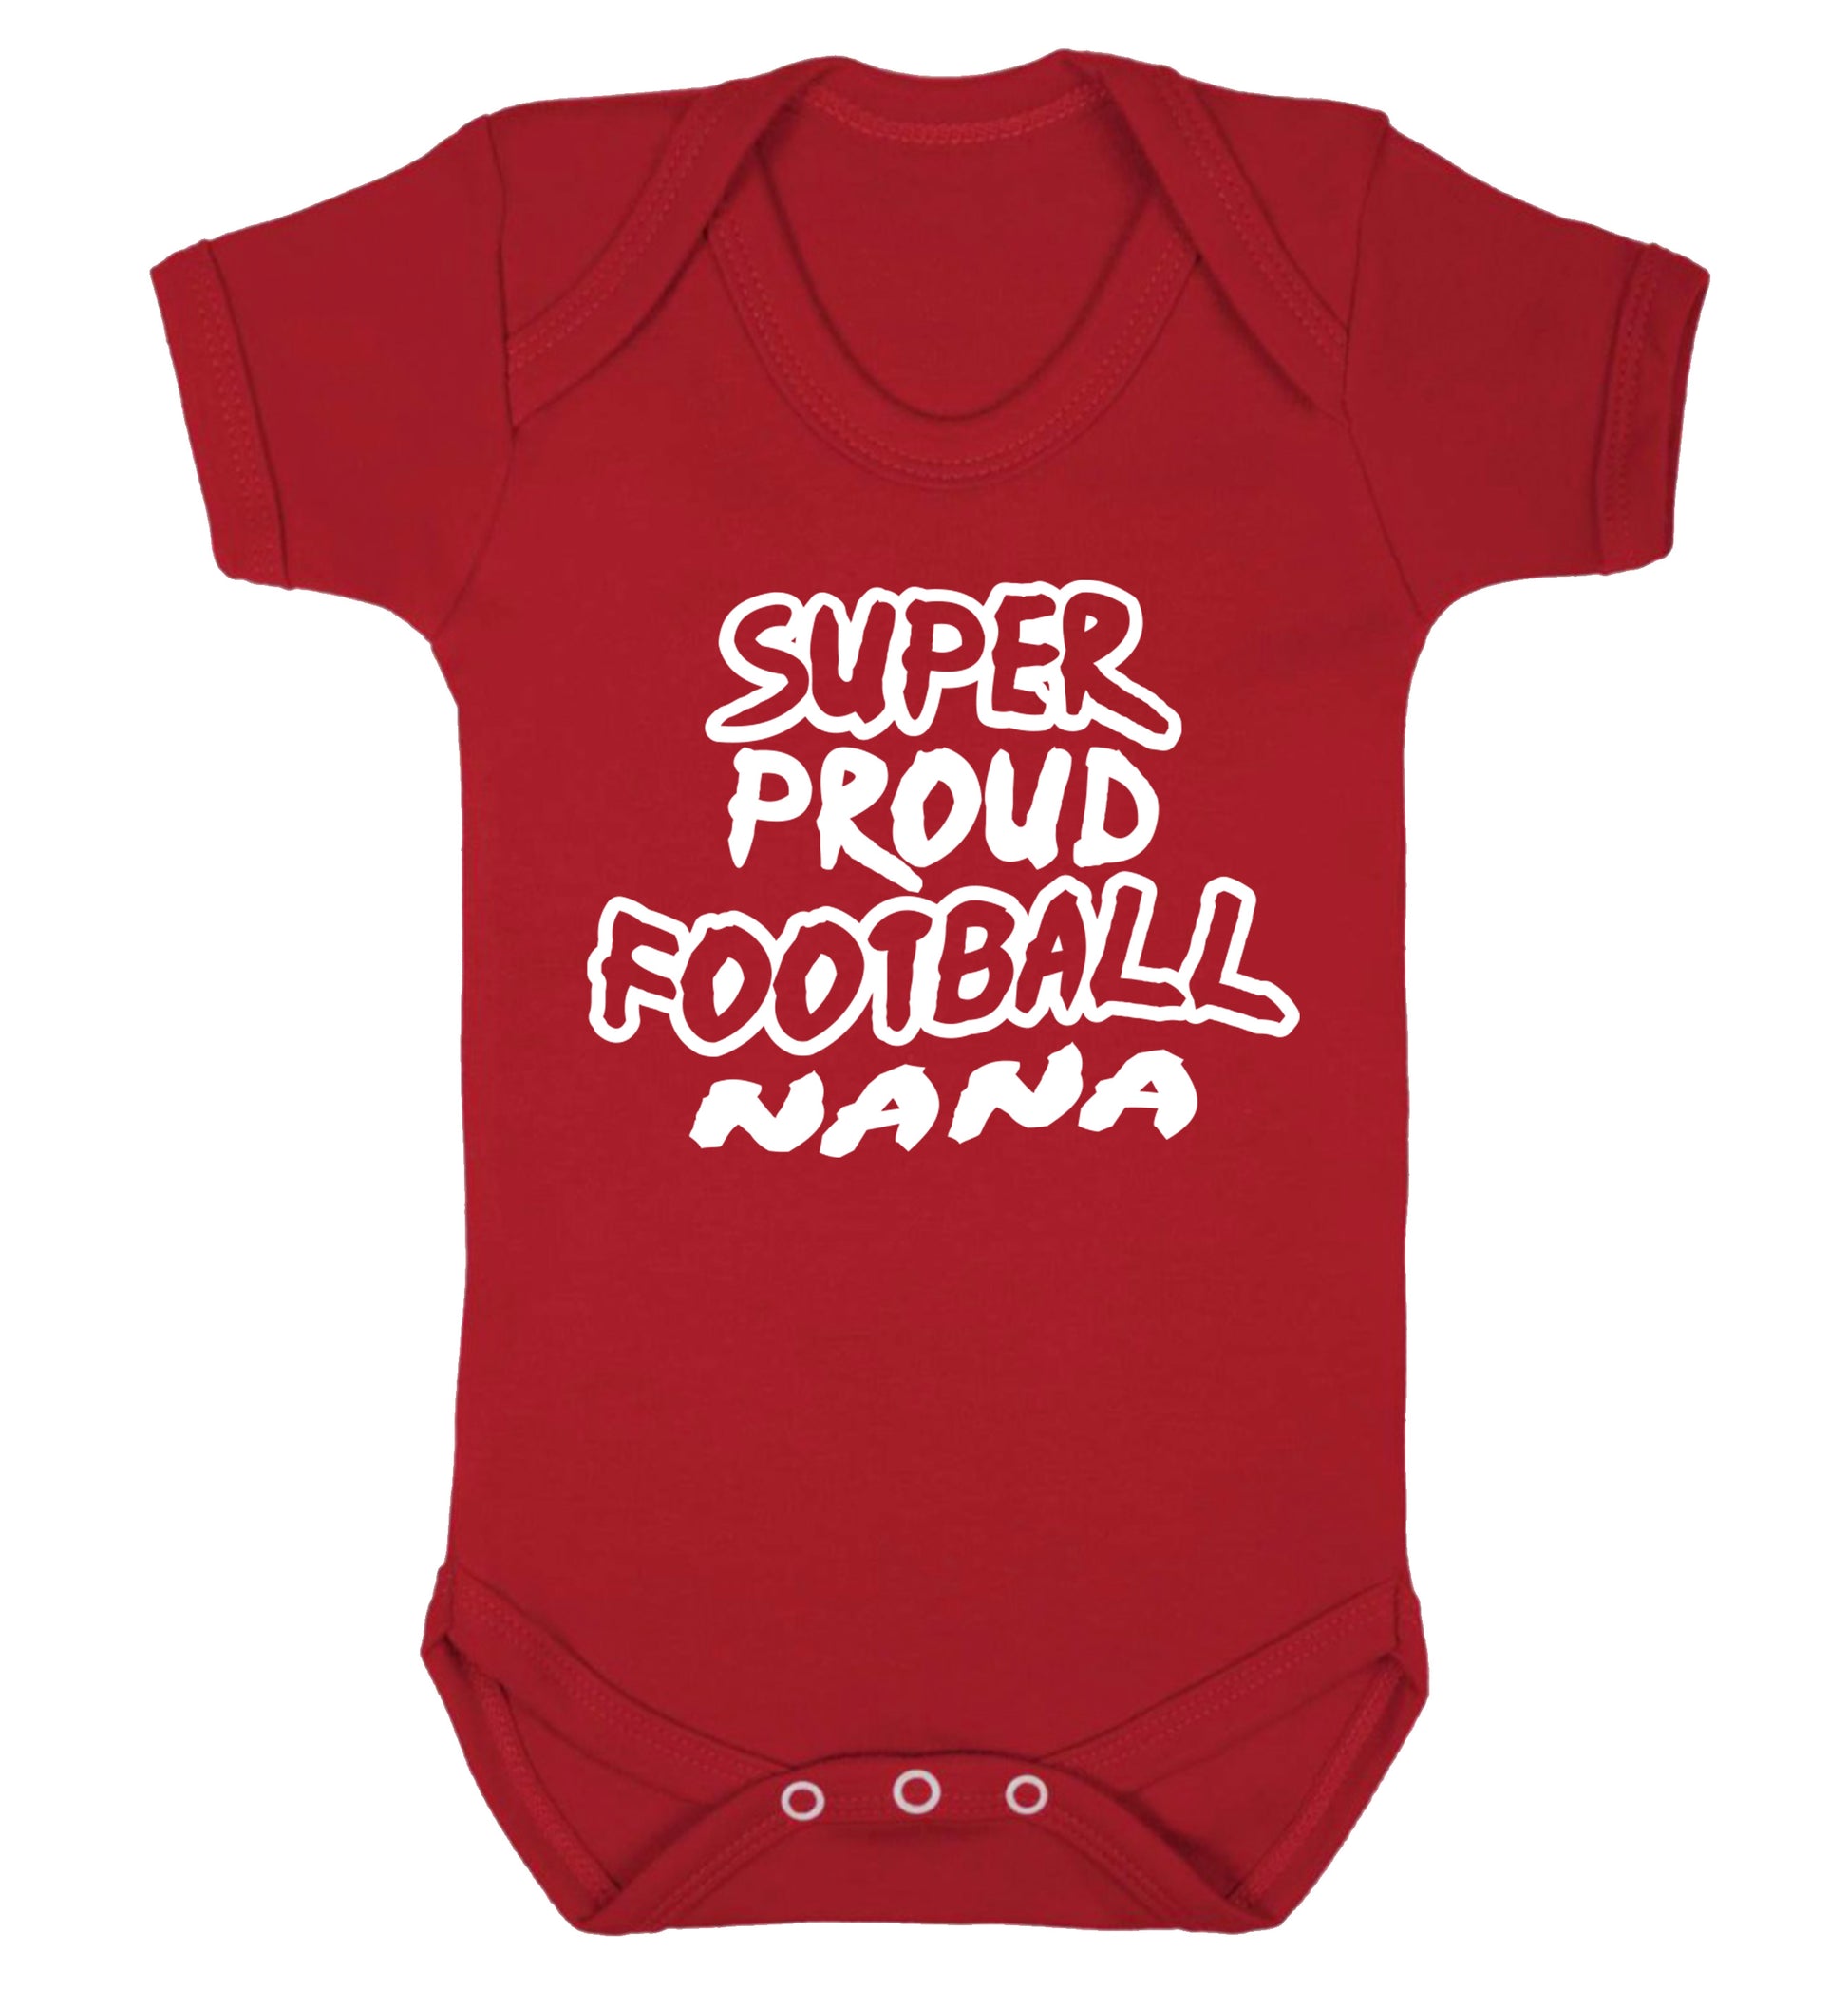 Super proud football nana Baby Vest red 18-24 months